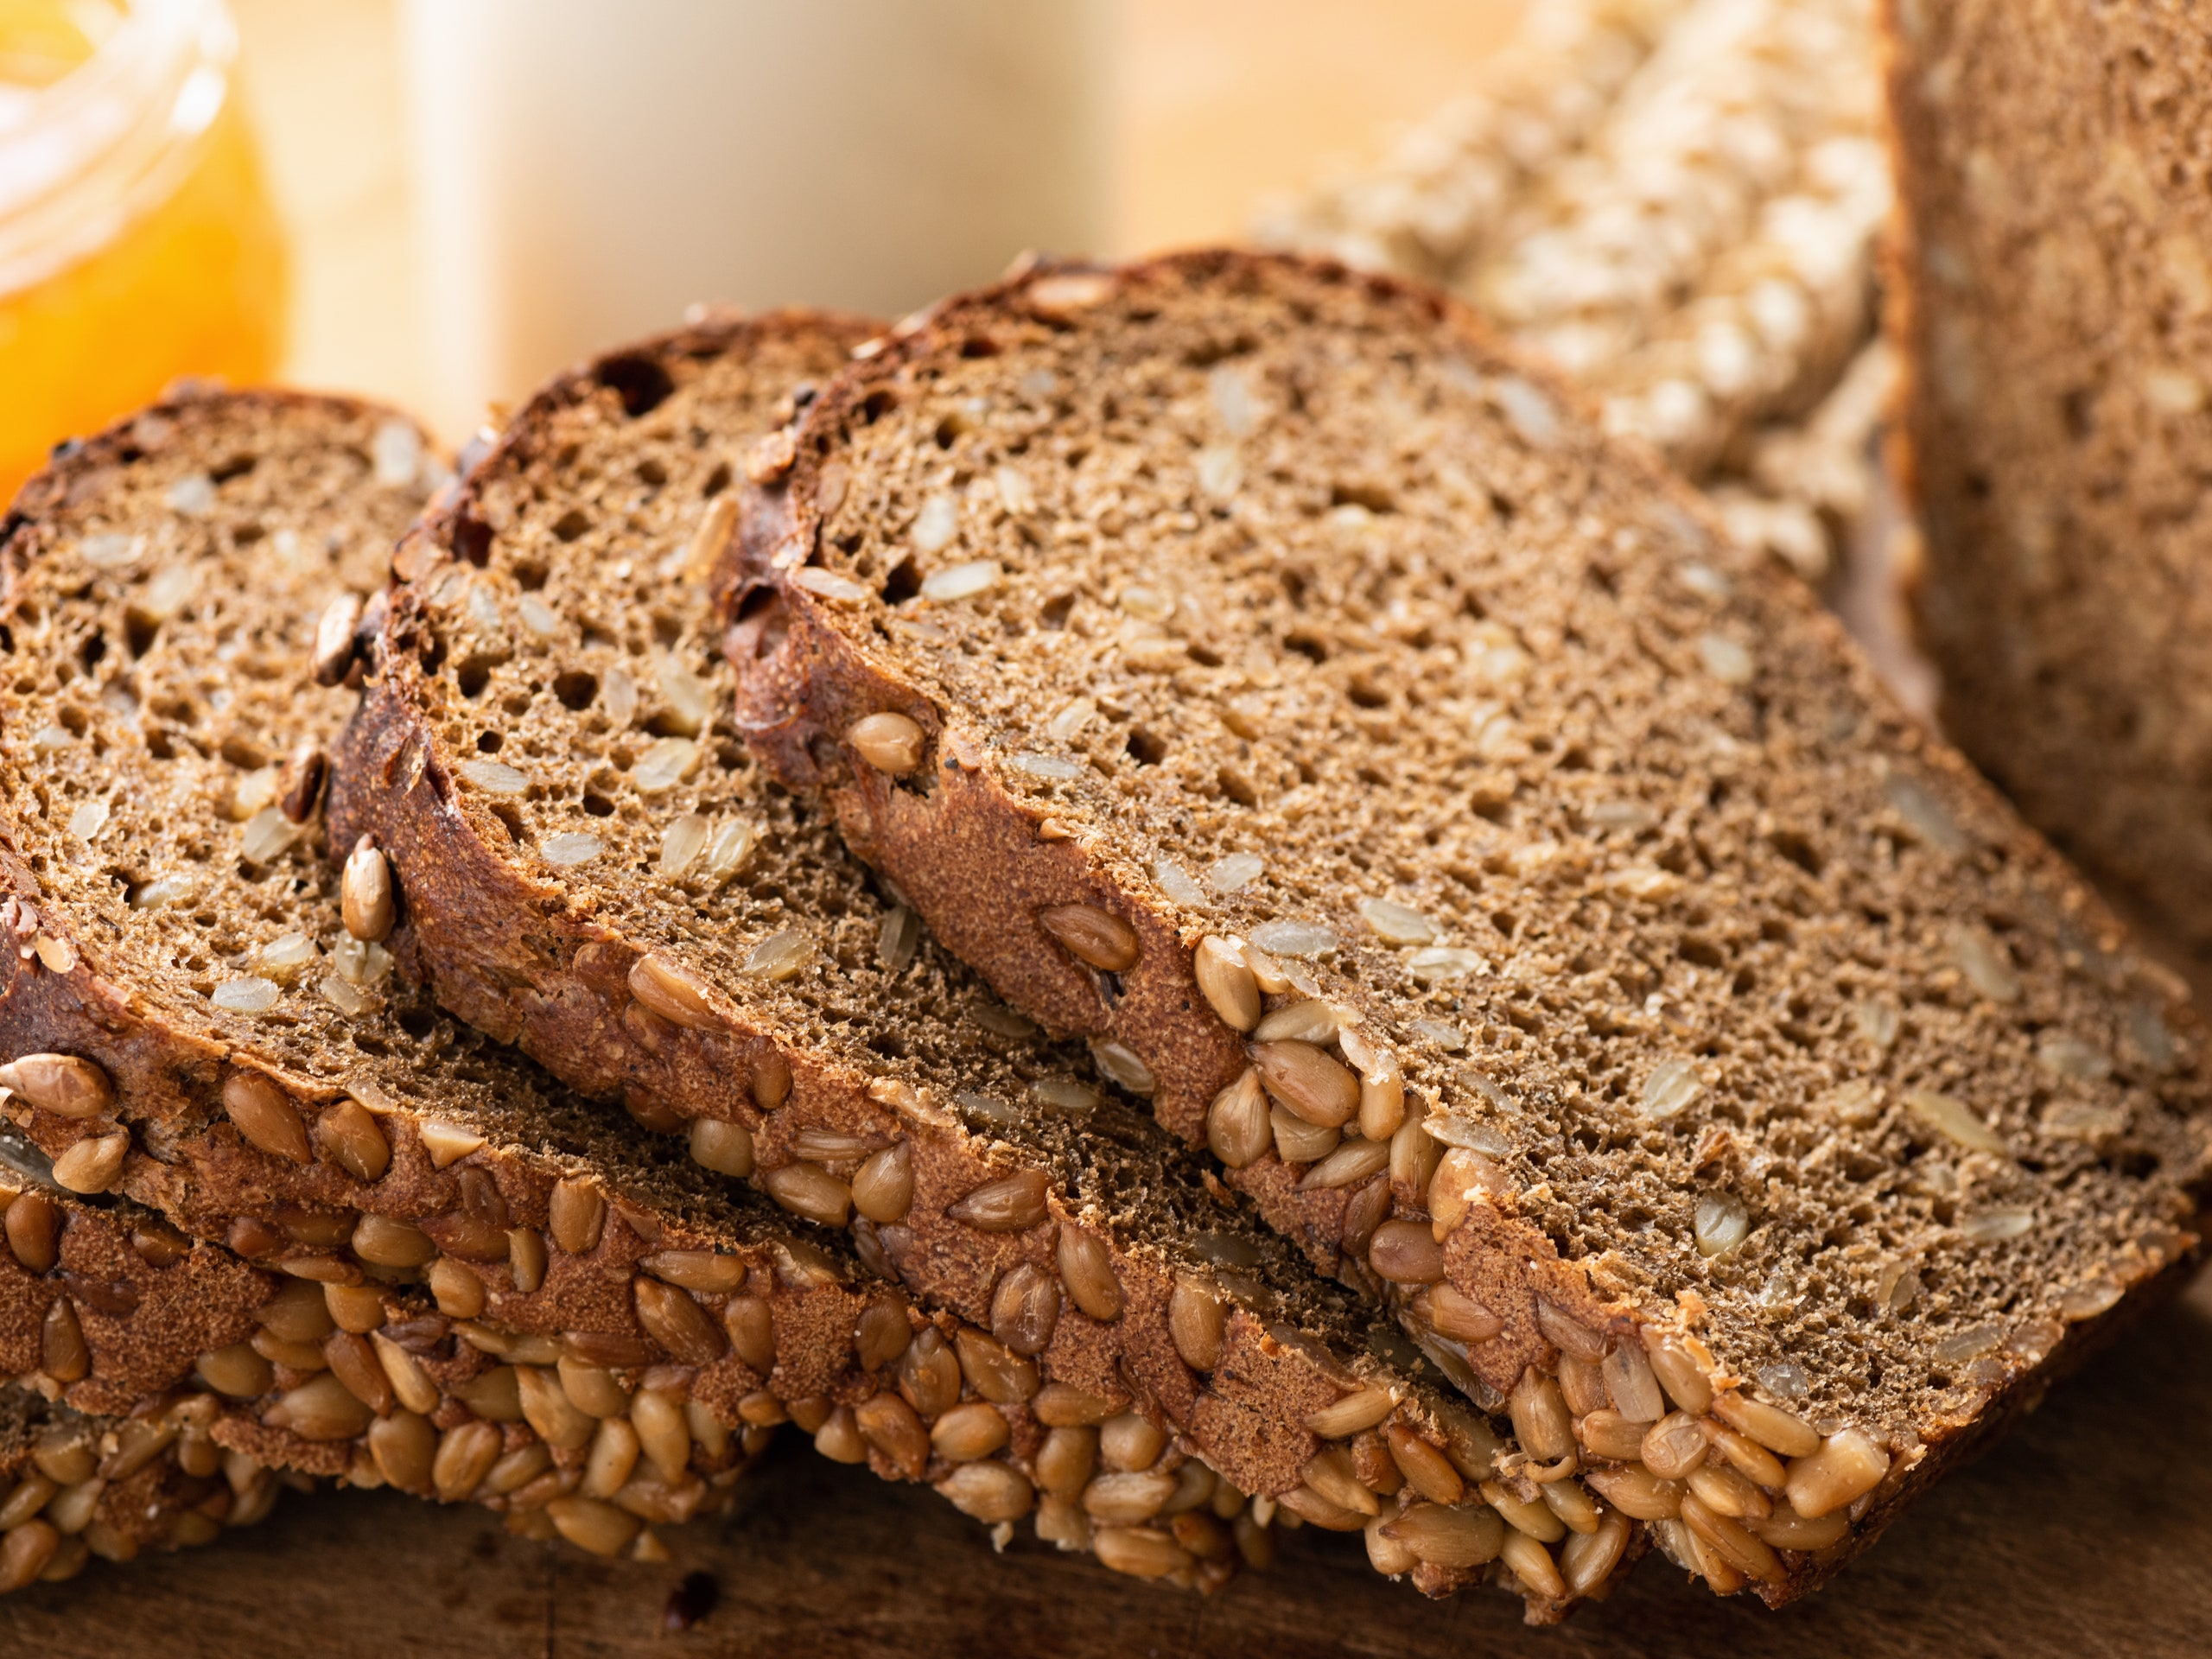 Can Whole Wheat Bread Help You Lose Weight